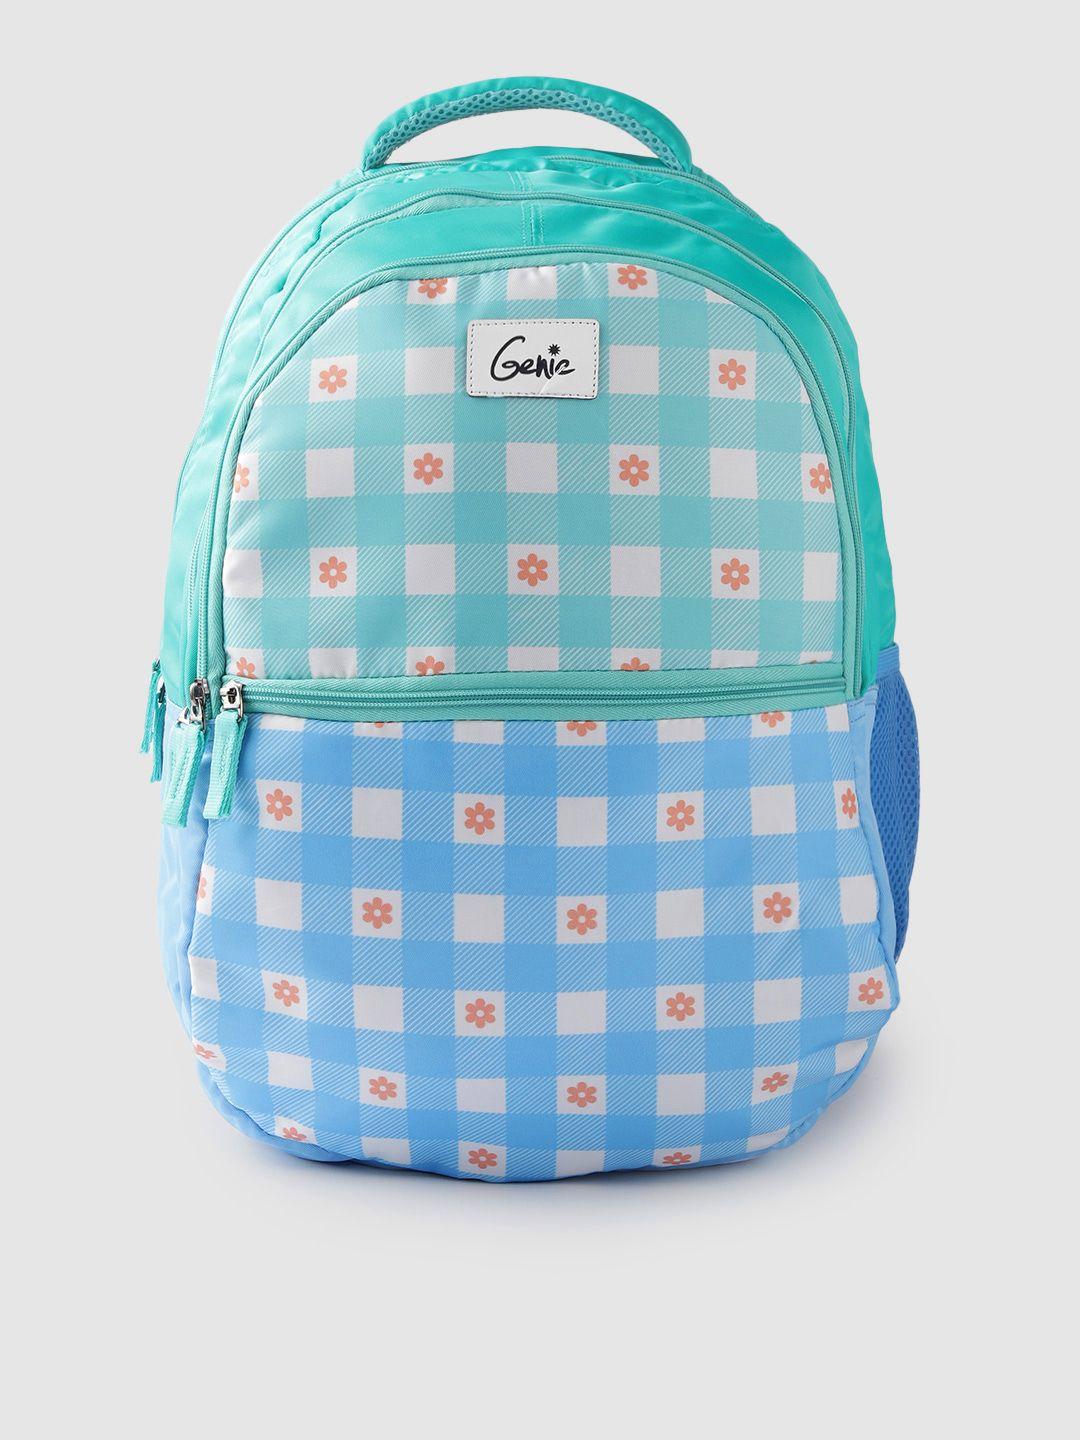 genie women colourblocked & checked backpack